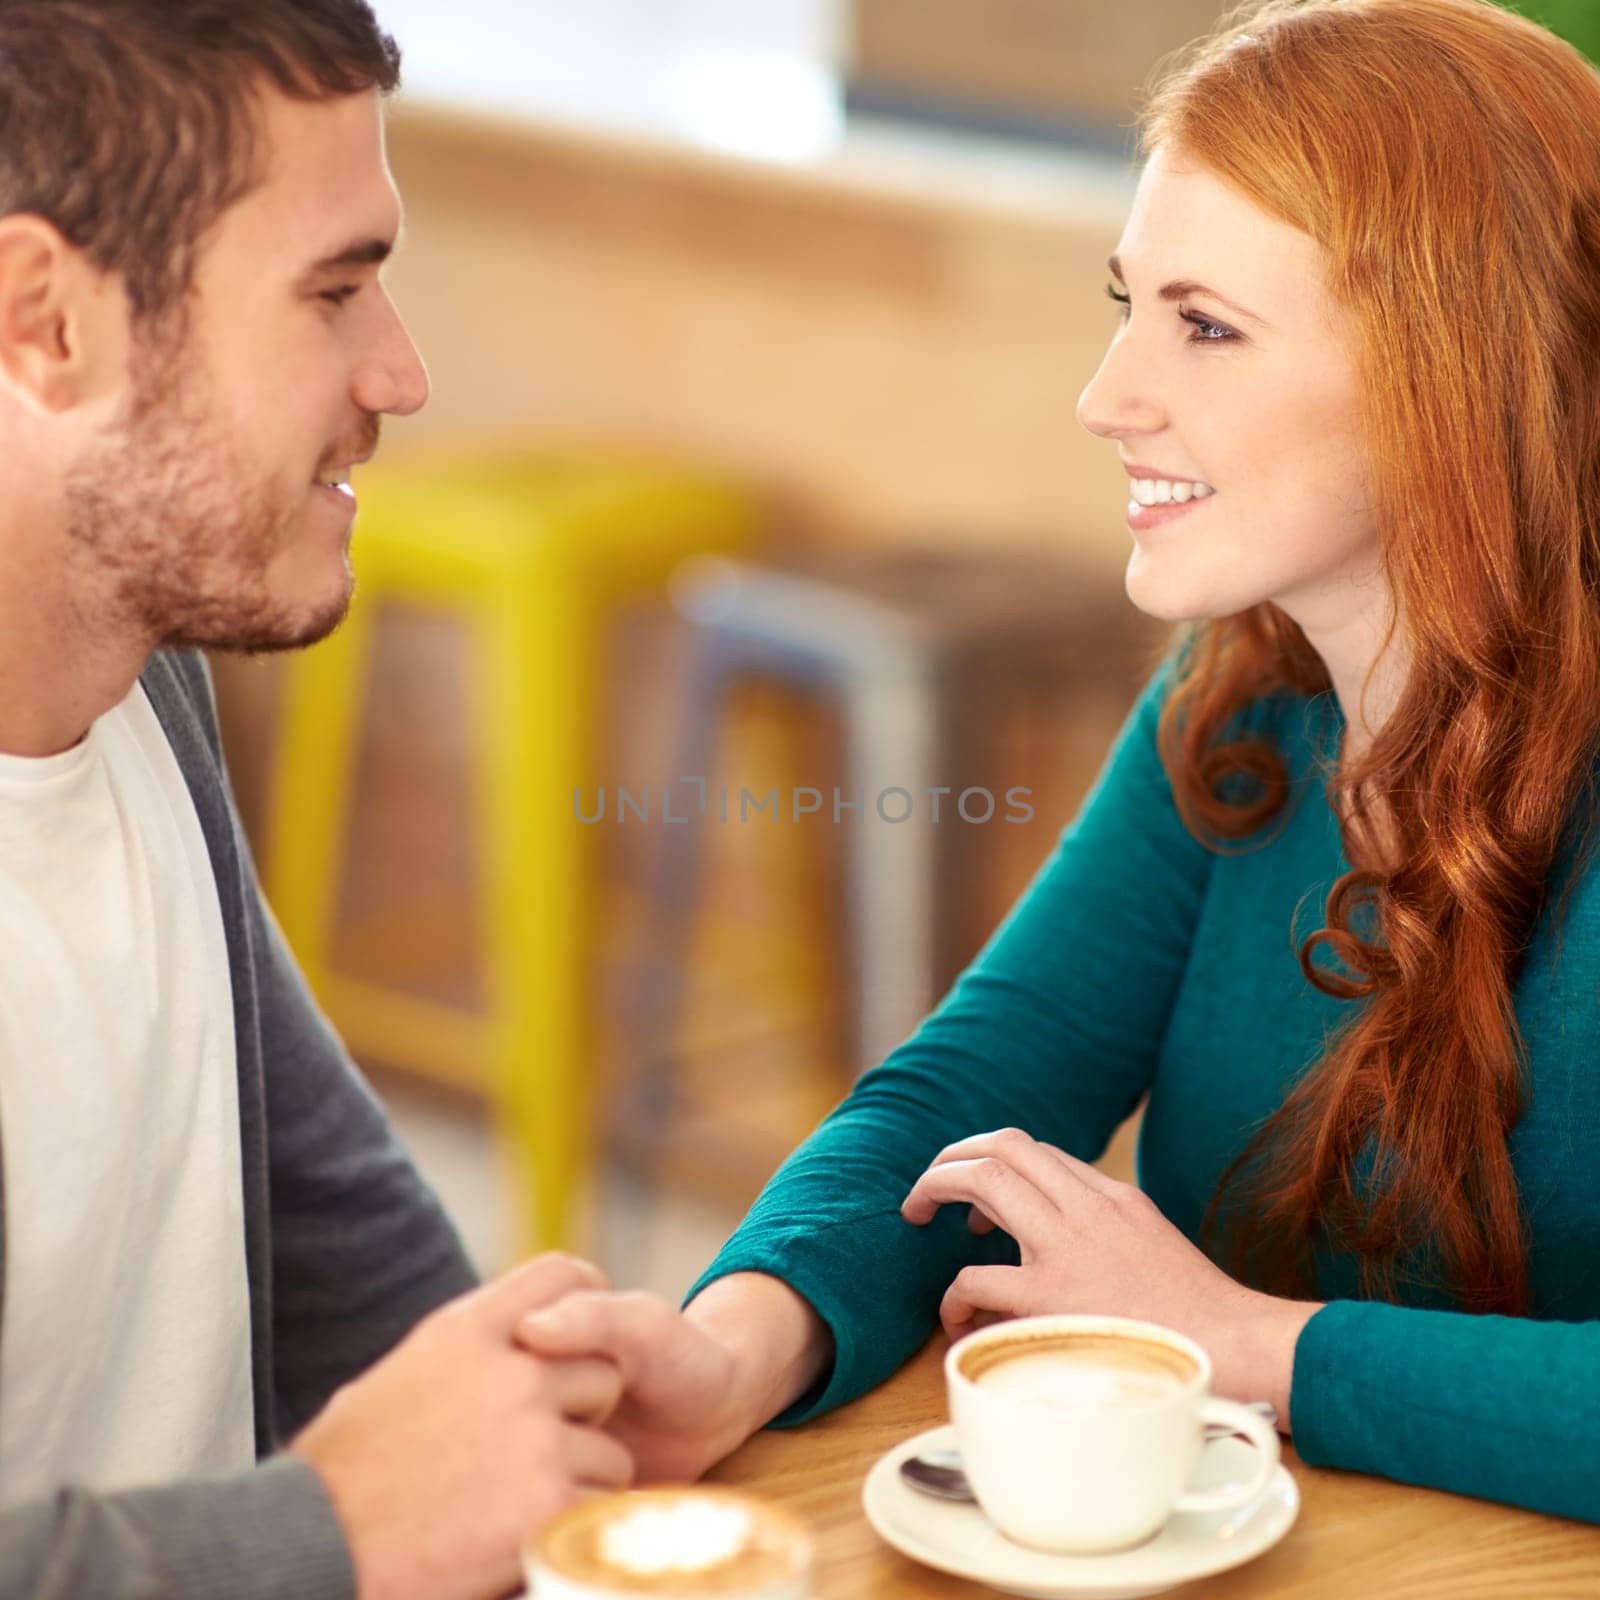 Restaurant, date and couple with coffee, holding hands and relationship with romance and flirt. Cafe, man and woman with cappuccino or bonding together with care or love with marriage, smile or trust.